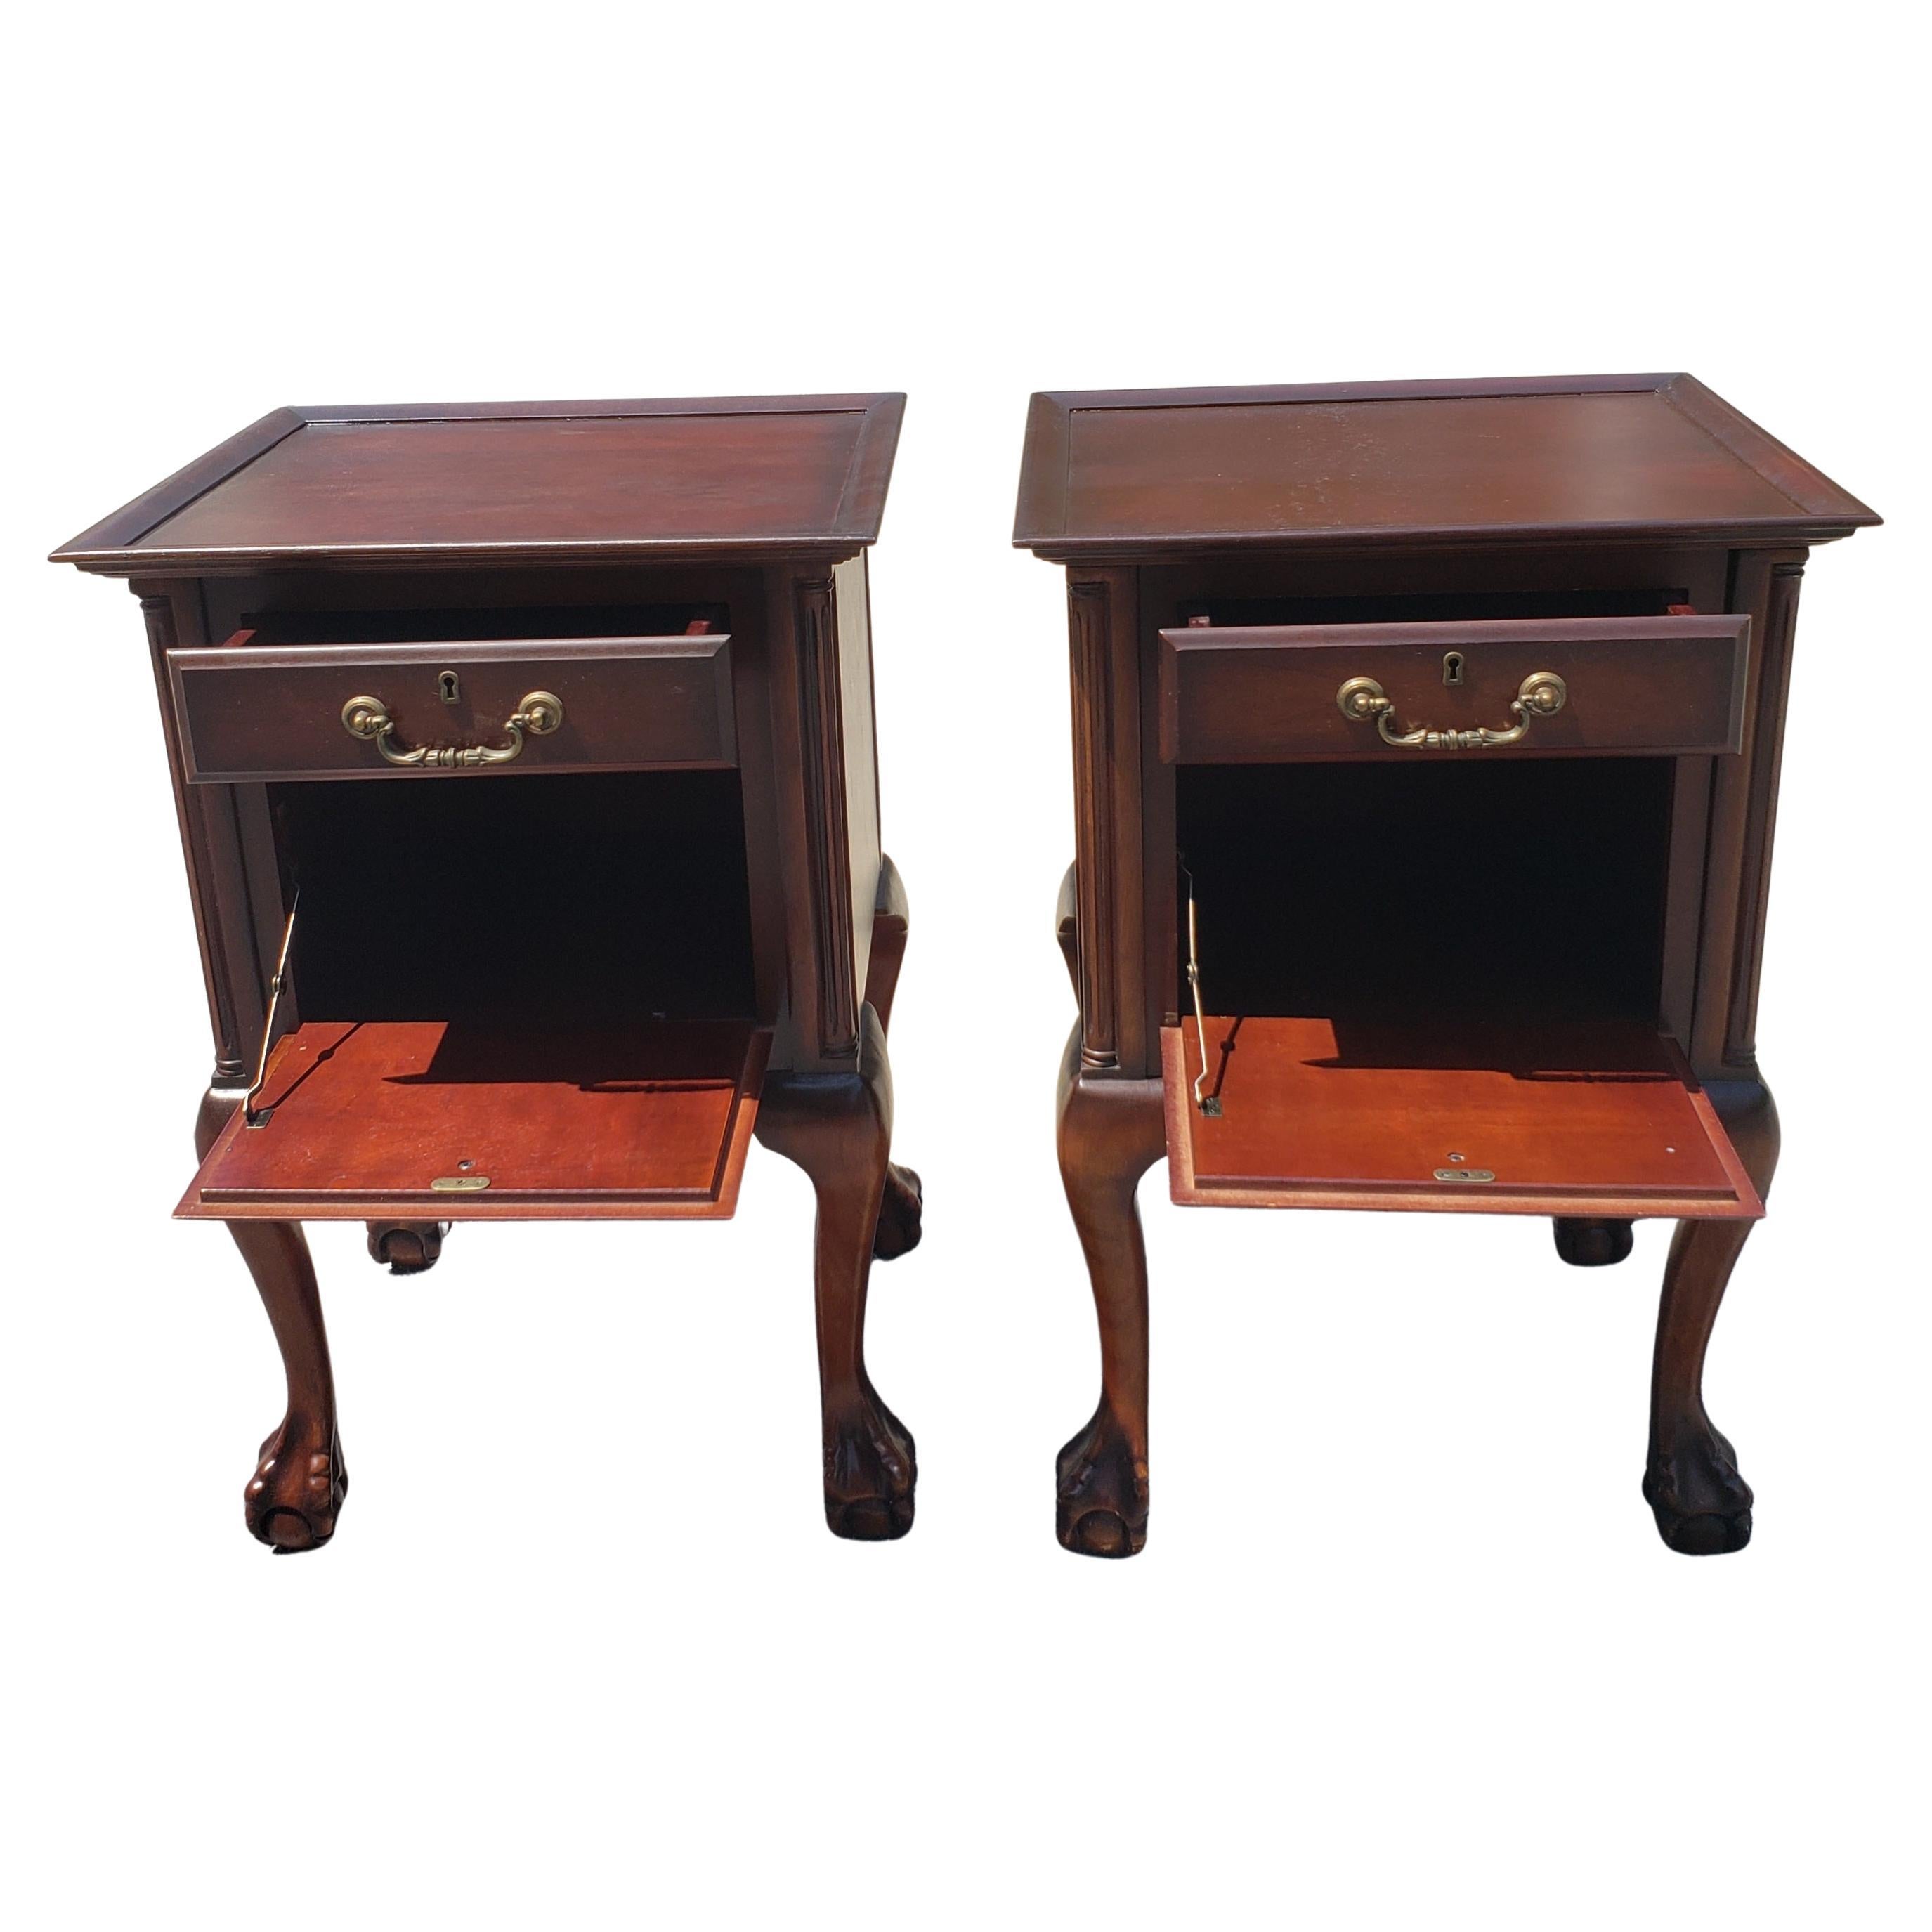 Unique set of vintage mahogany pair of nightstands side table. Table one drawer and large cabinet style storage space with pull down door. Table tops have just been refinished and are in excellent condition. Finished on all sides and back, making